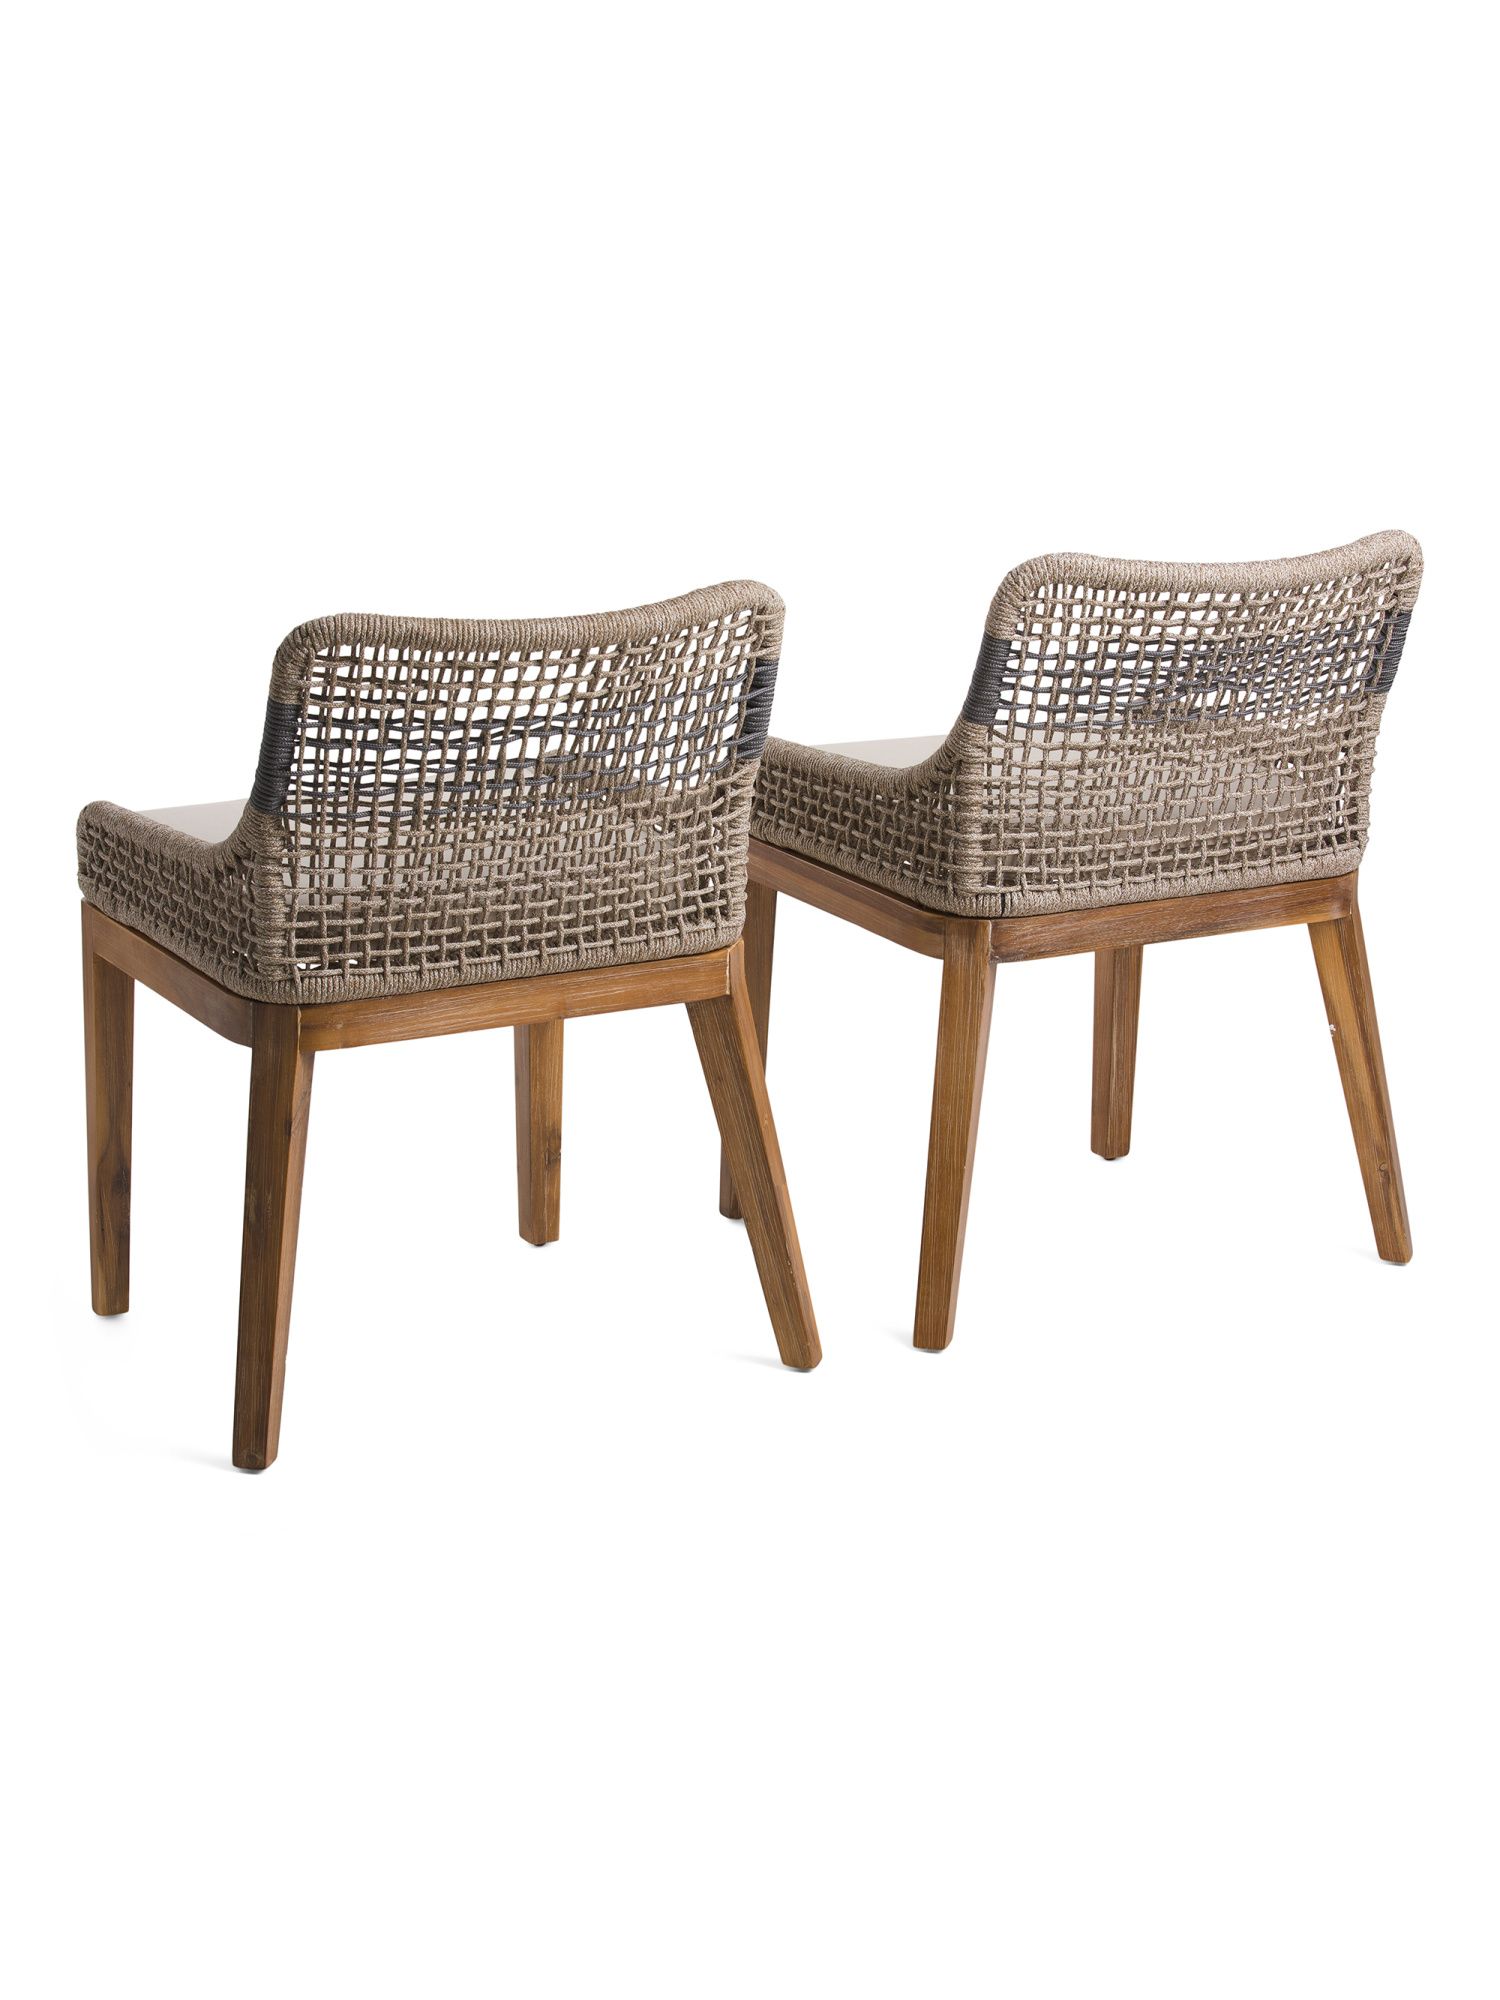 Set Of 2 Woven Stripe Dining Chairs | Kitchen & Dining Room | Marshalls | Marshalls